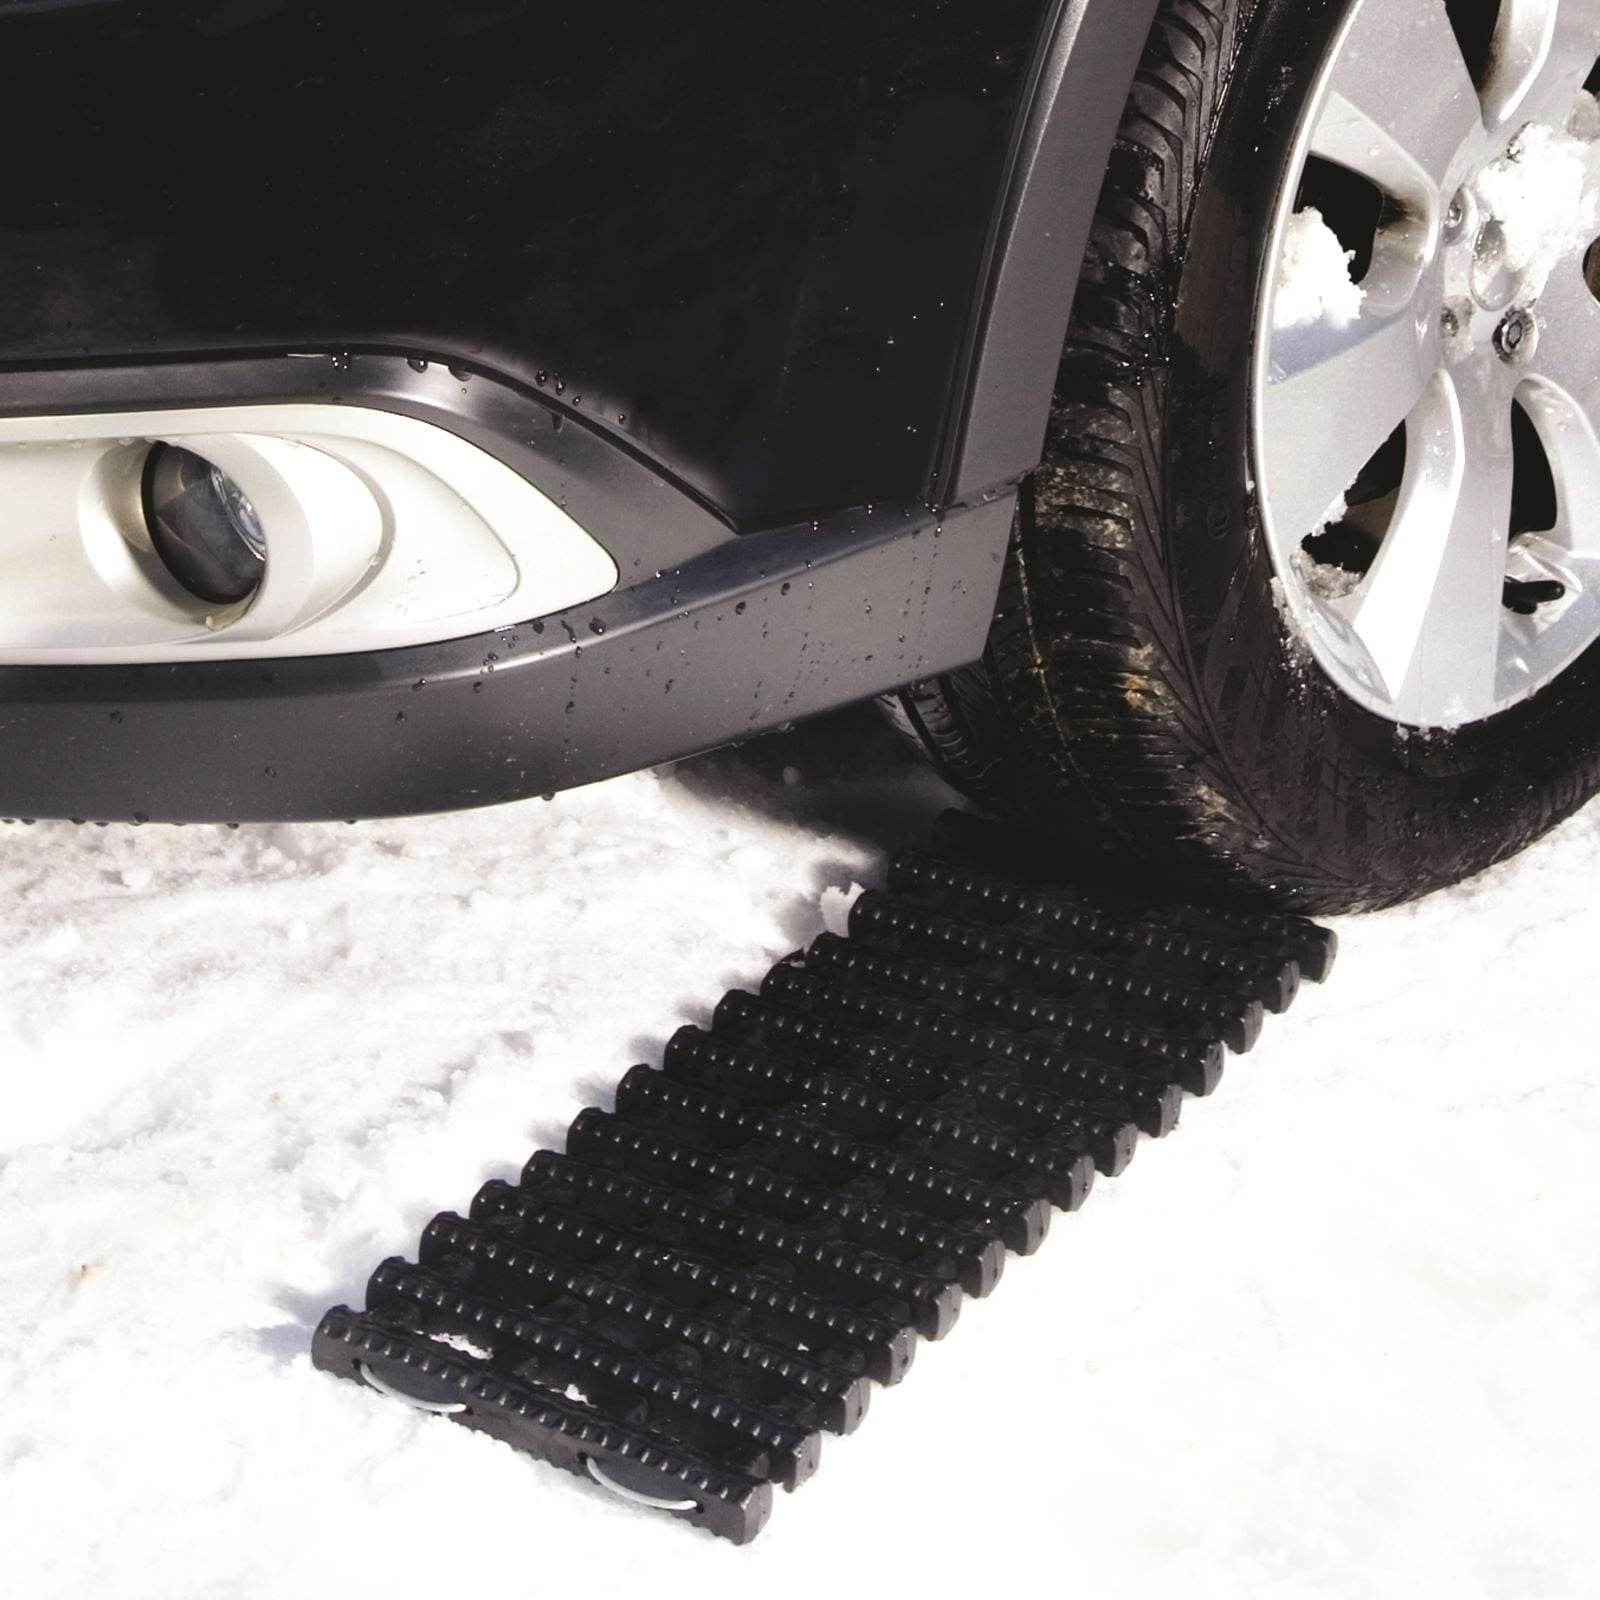 Snow Joe All Surface TrackAssist Non-Slip Traction24-InchFor Car Tires 